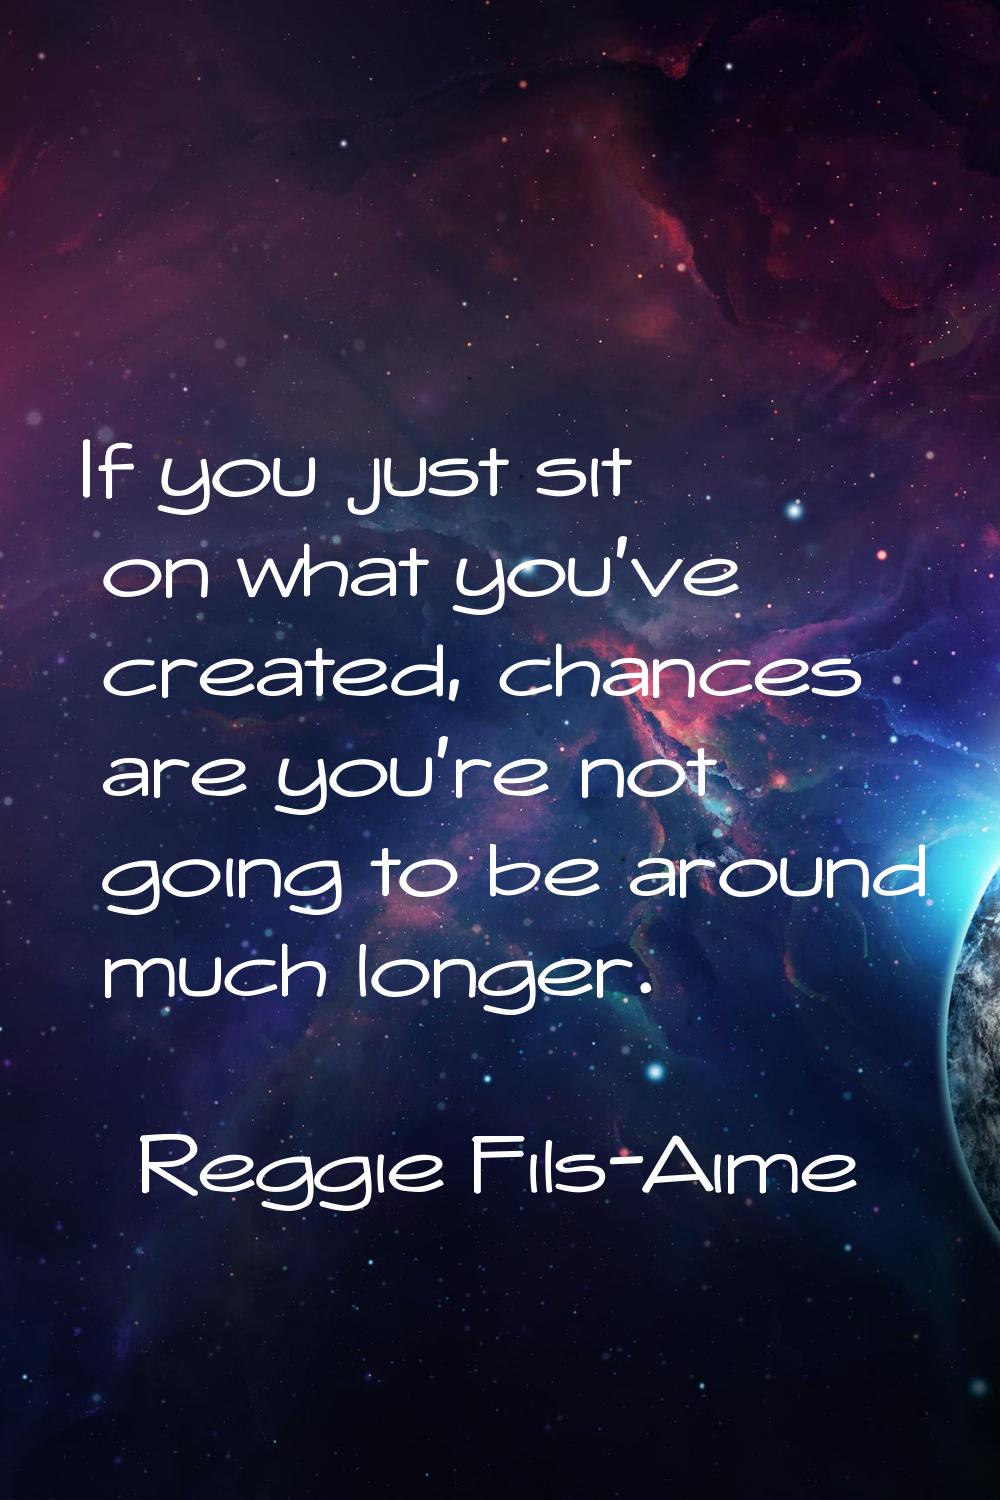 If you just sit on what you've created, chances are you're not going to be around much longer.